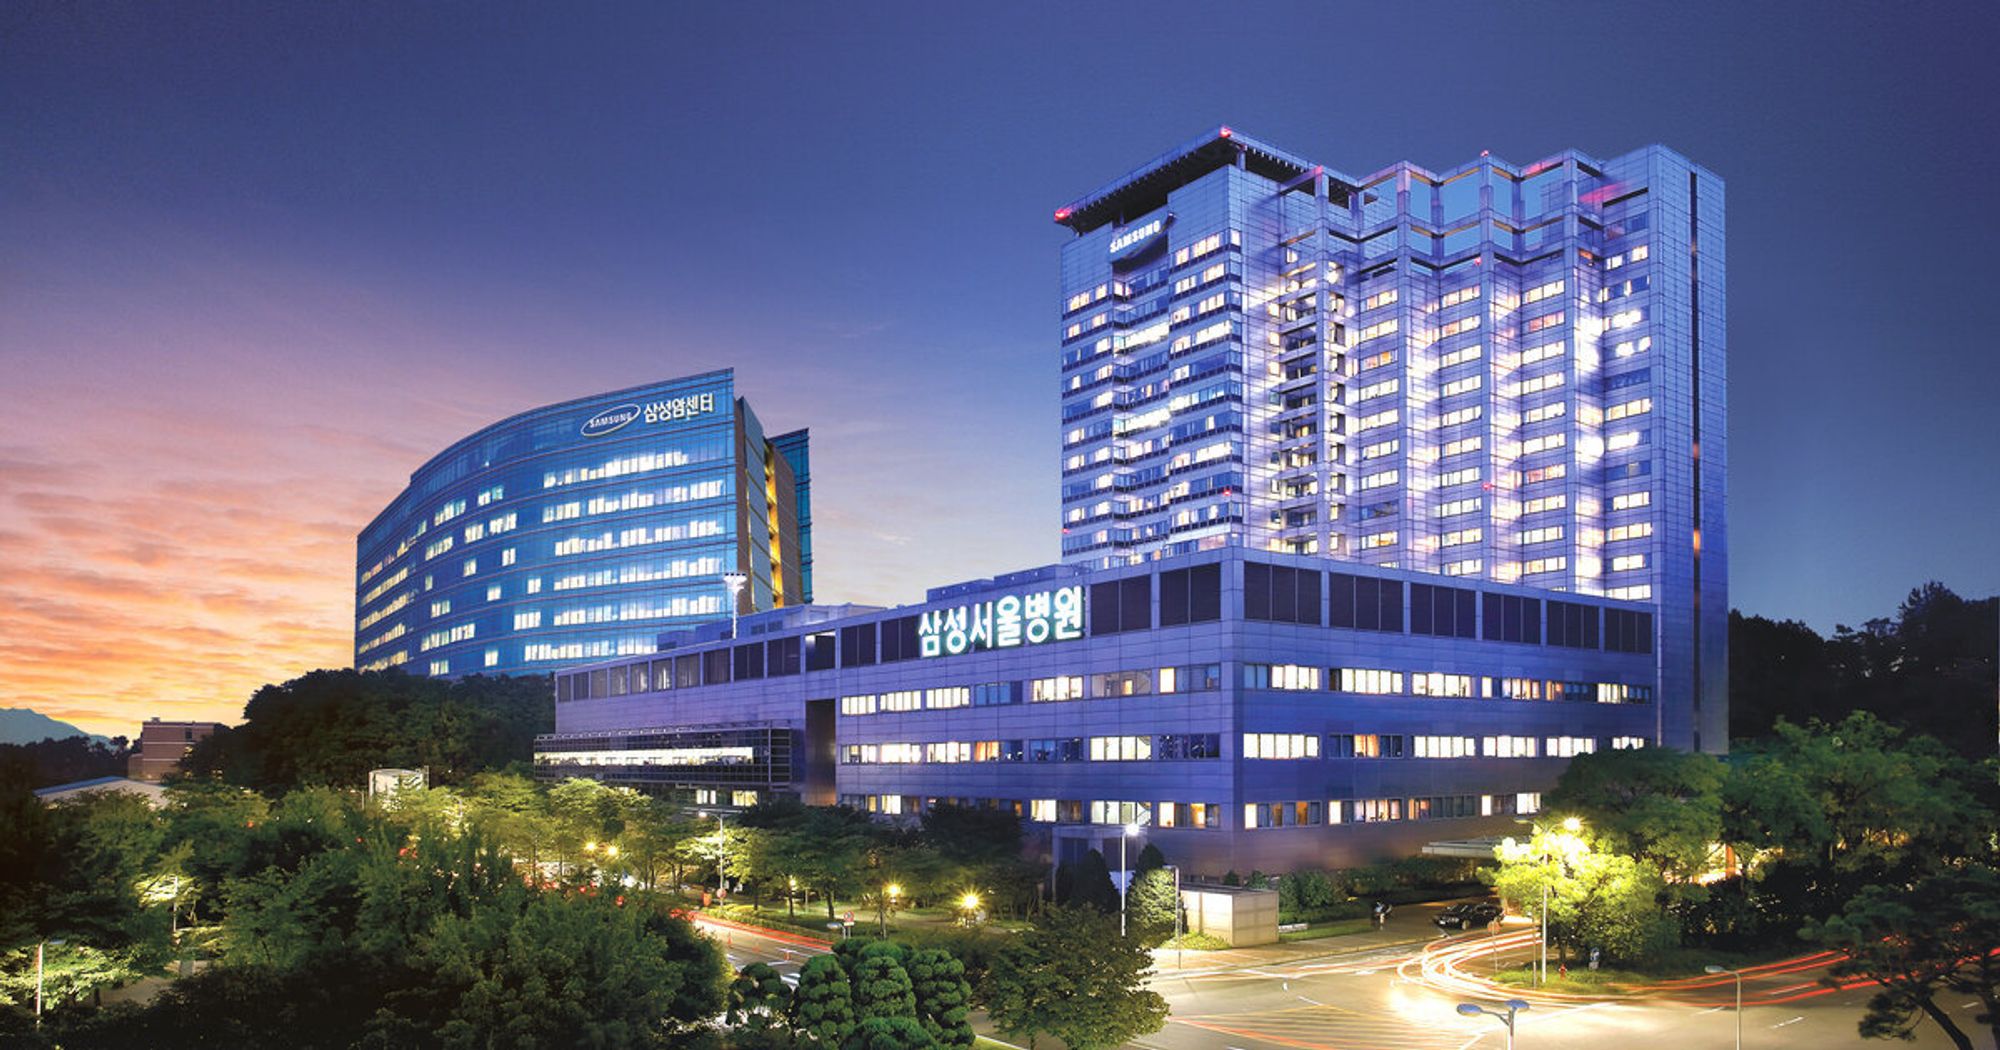 Samsung Medical Center begins transformation to become a robot-driven 5G-powered hospital | Healthcare IT News